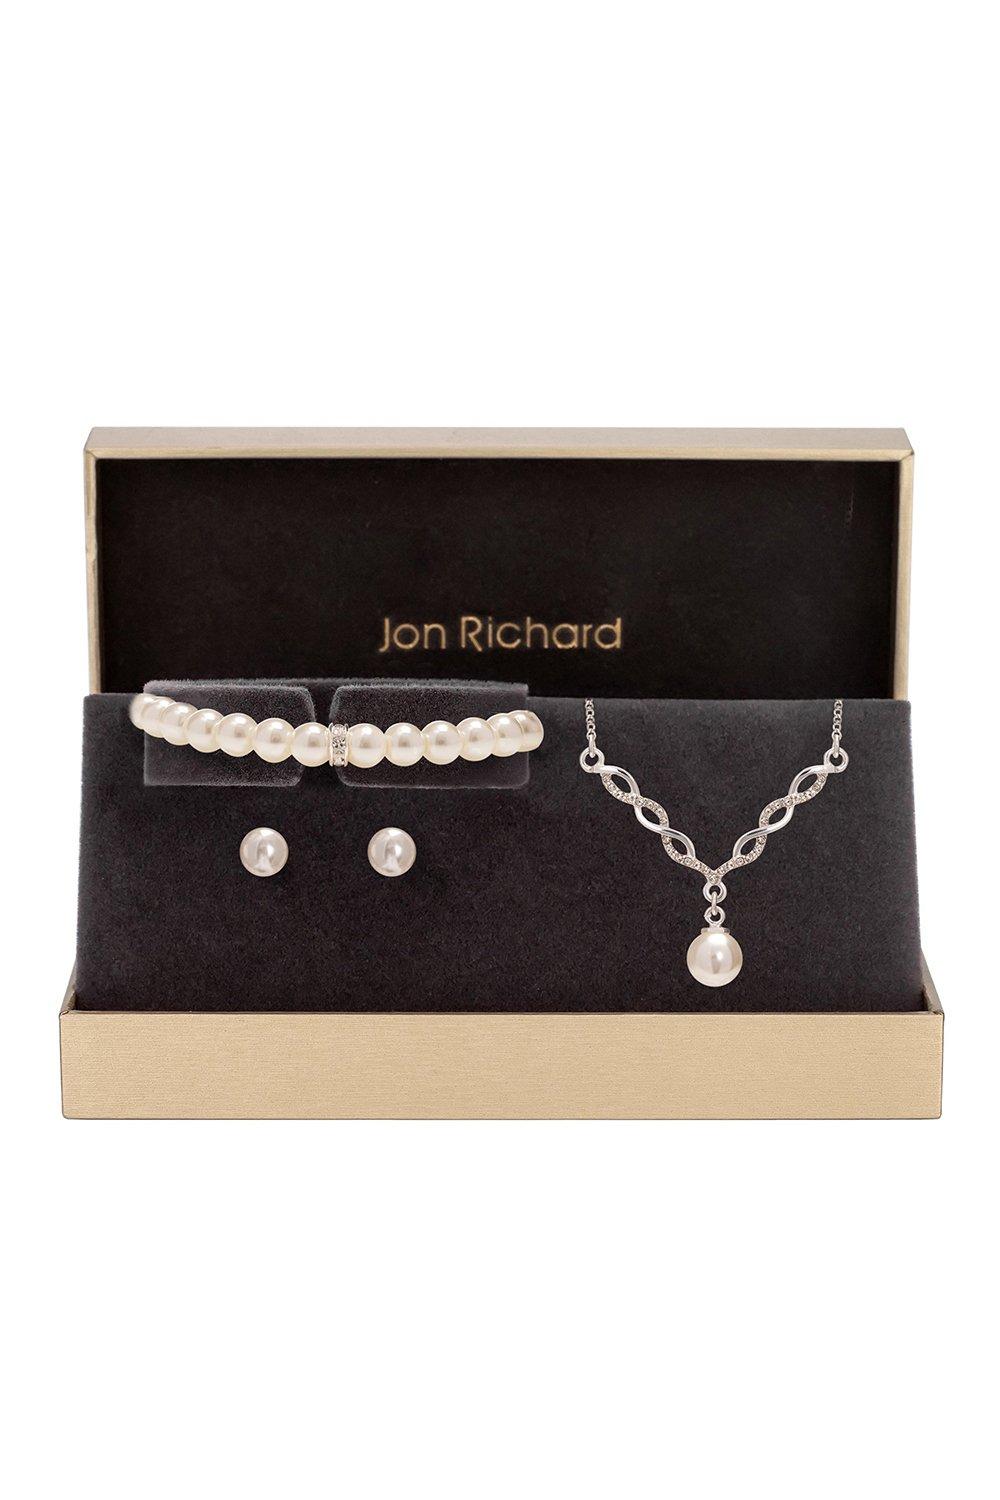 Jon Richard Women's Gift Packaged Crystal And Pearl Trio Set|silver